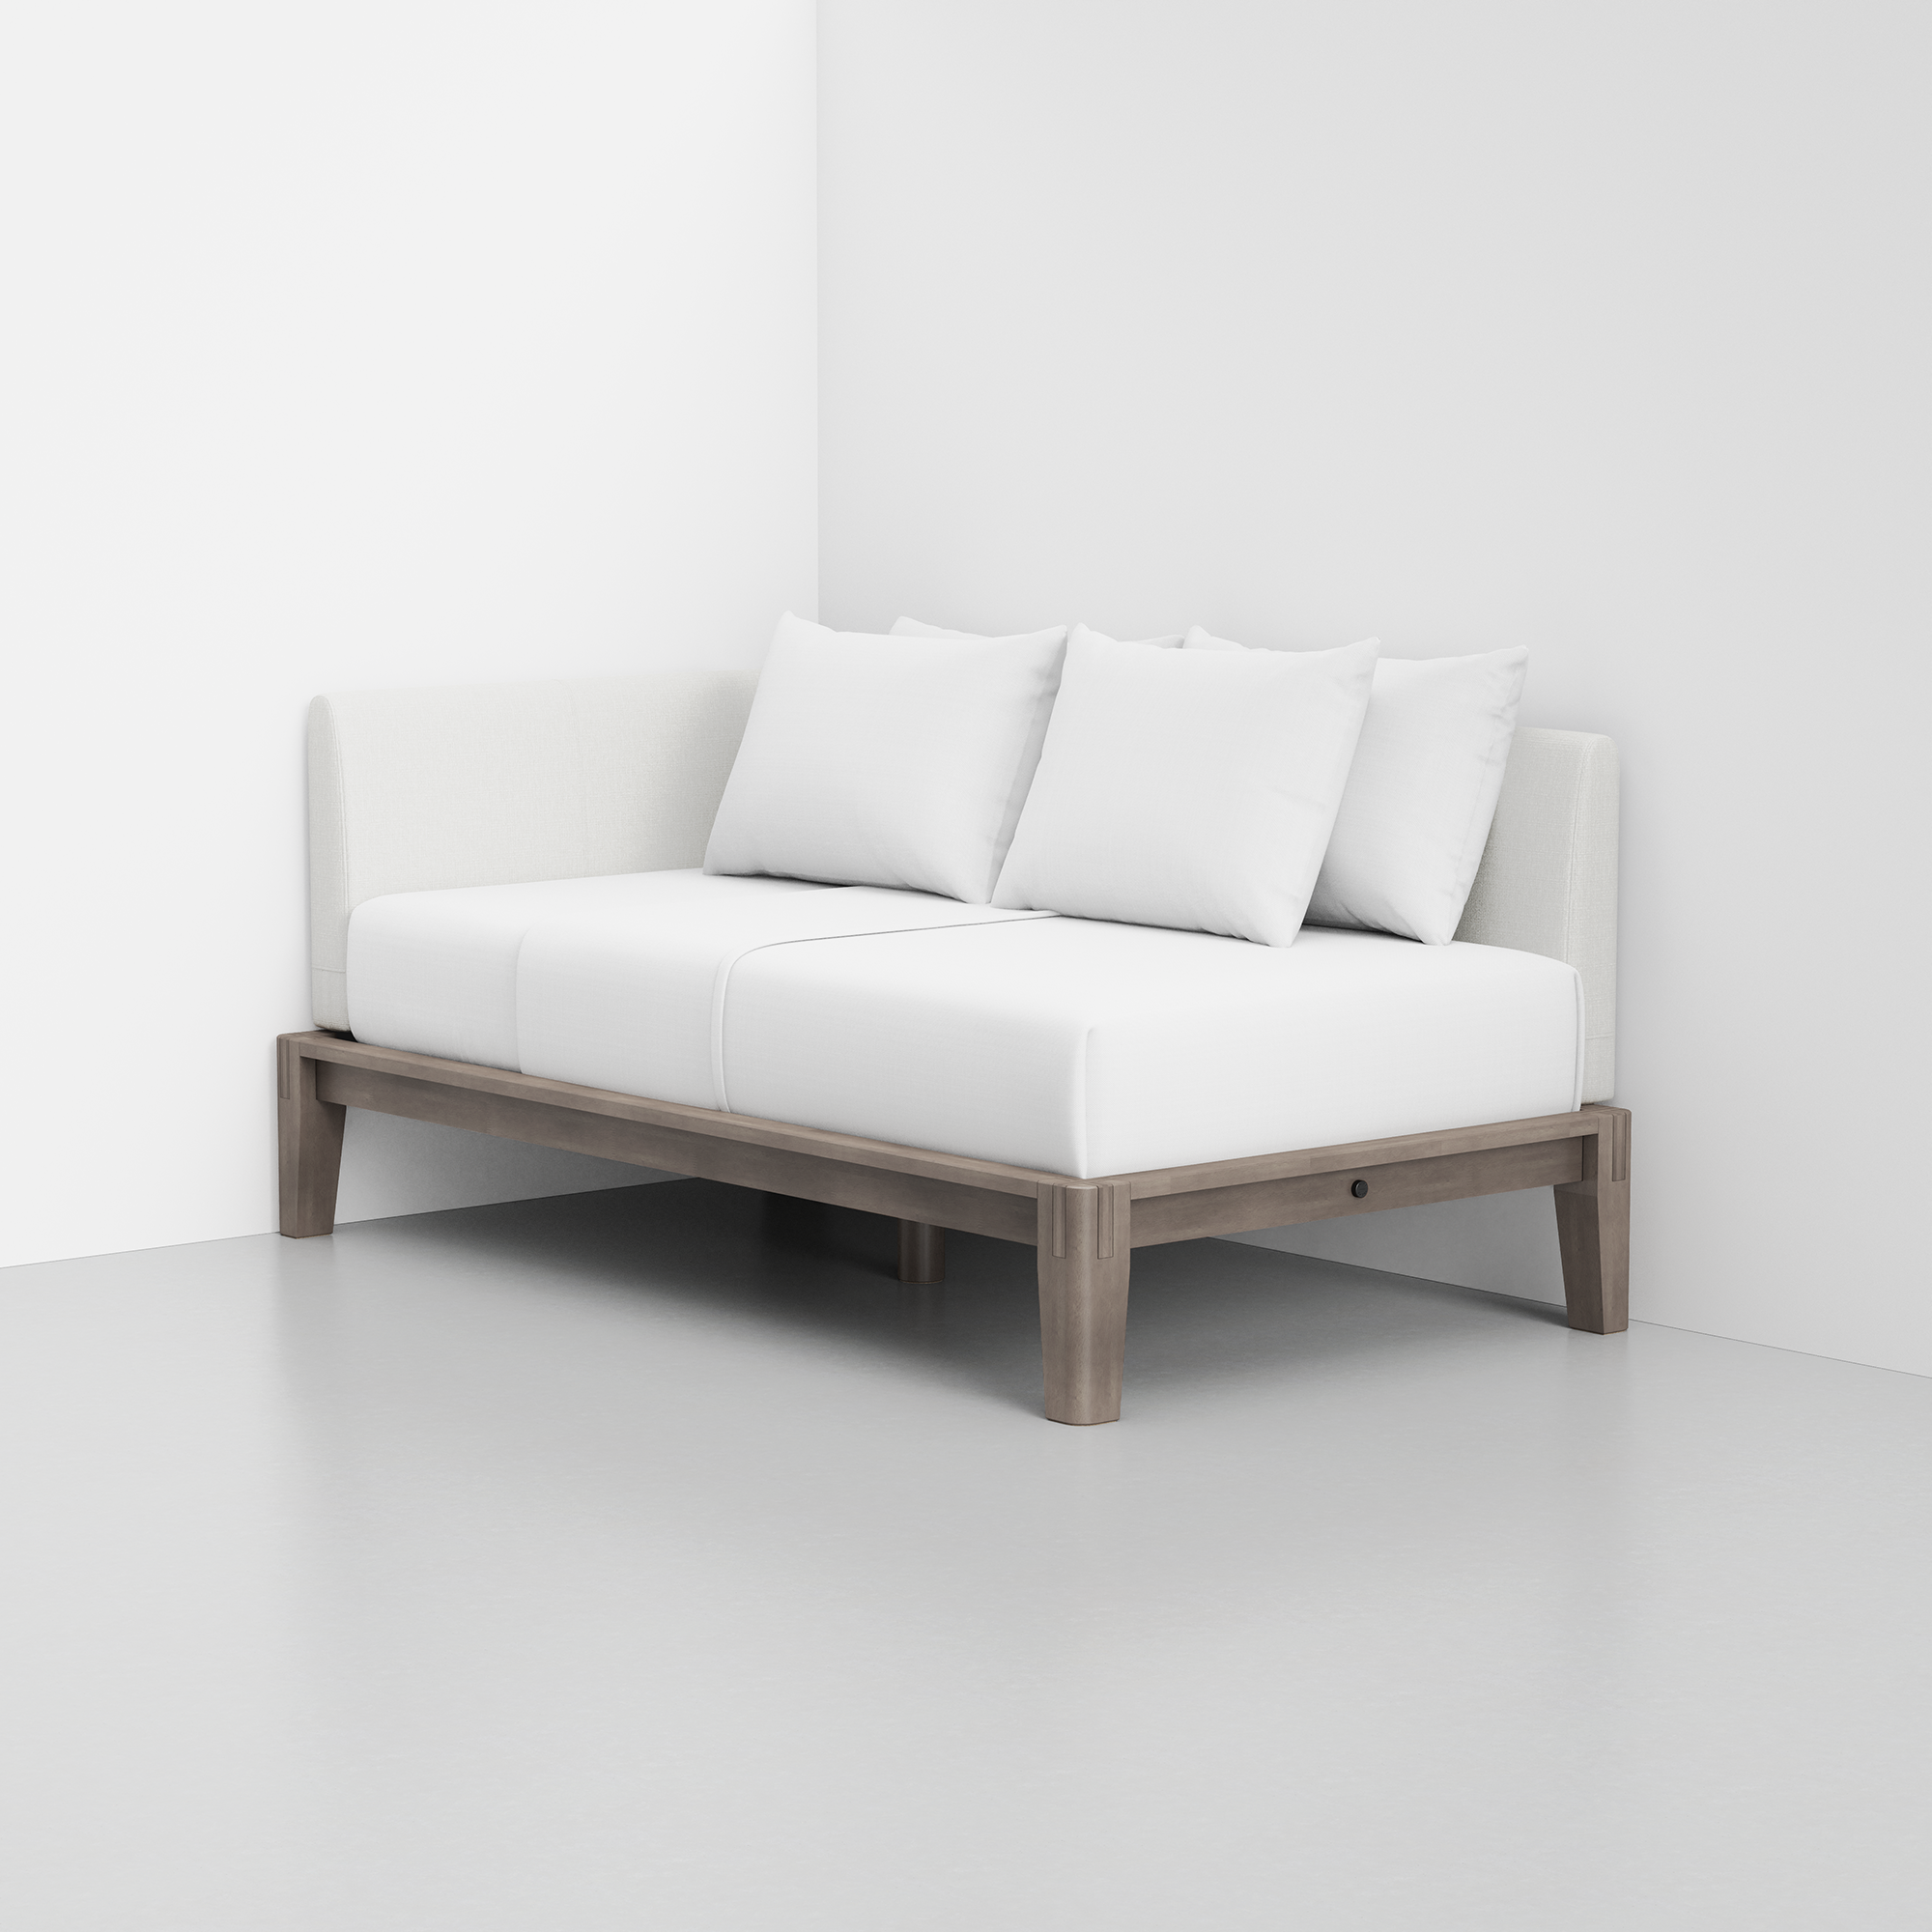 PDP Image: The Daybed (Grey / Light Linen) - Rendering - Pillows Stacked